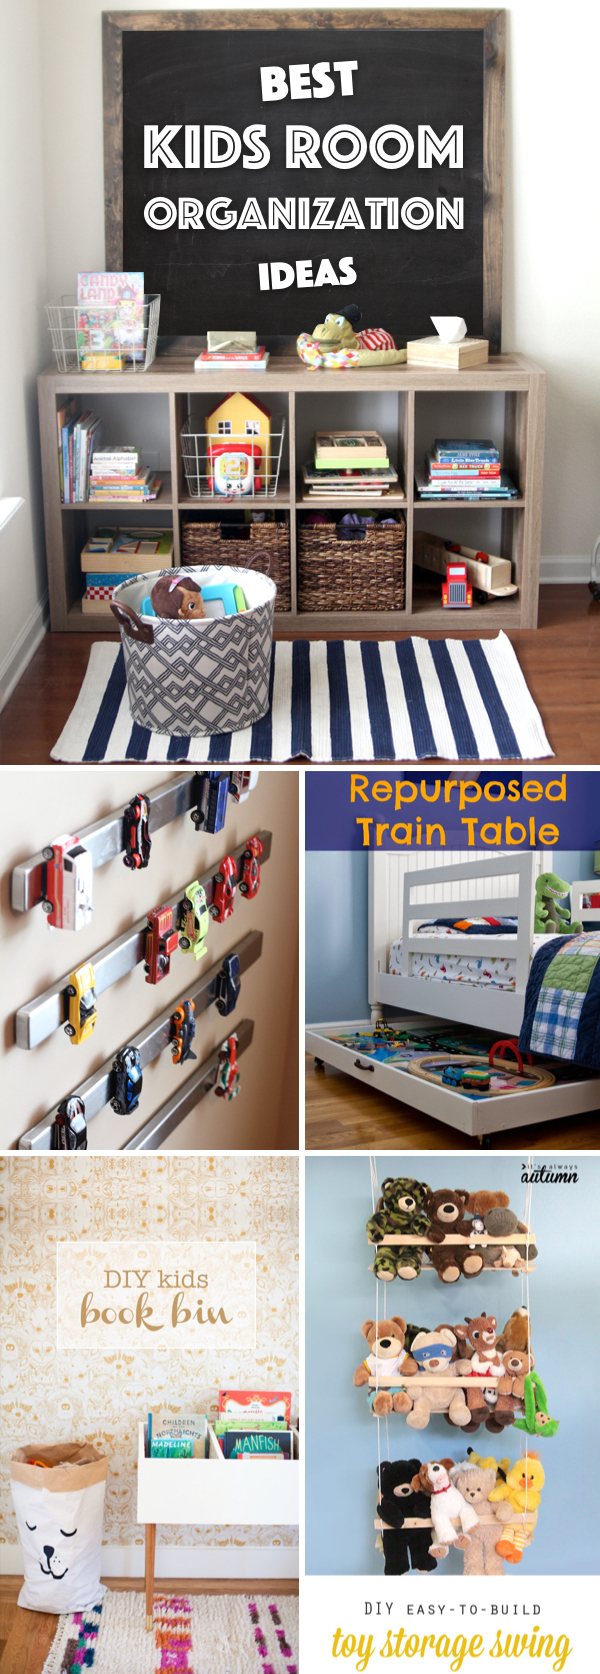 10 Fabulous Organizing Ideas For Kids Rooms 30 kids room organization ideas stretching from toys to school supplies 2022